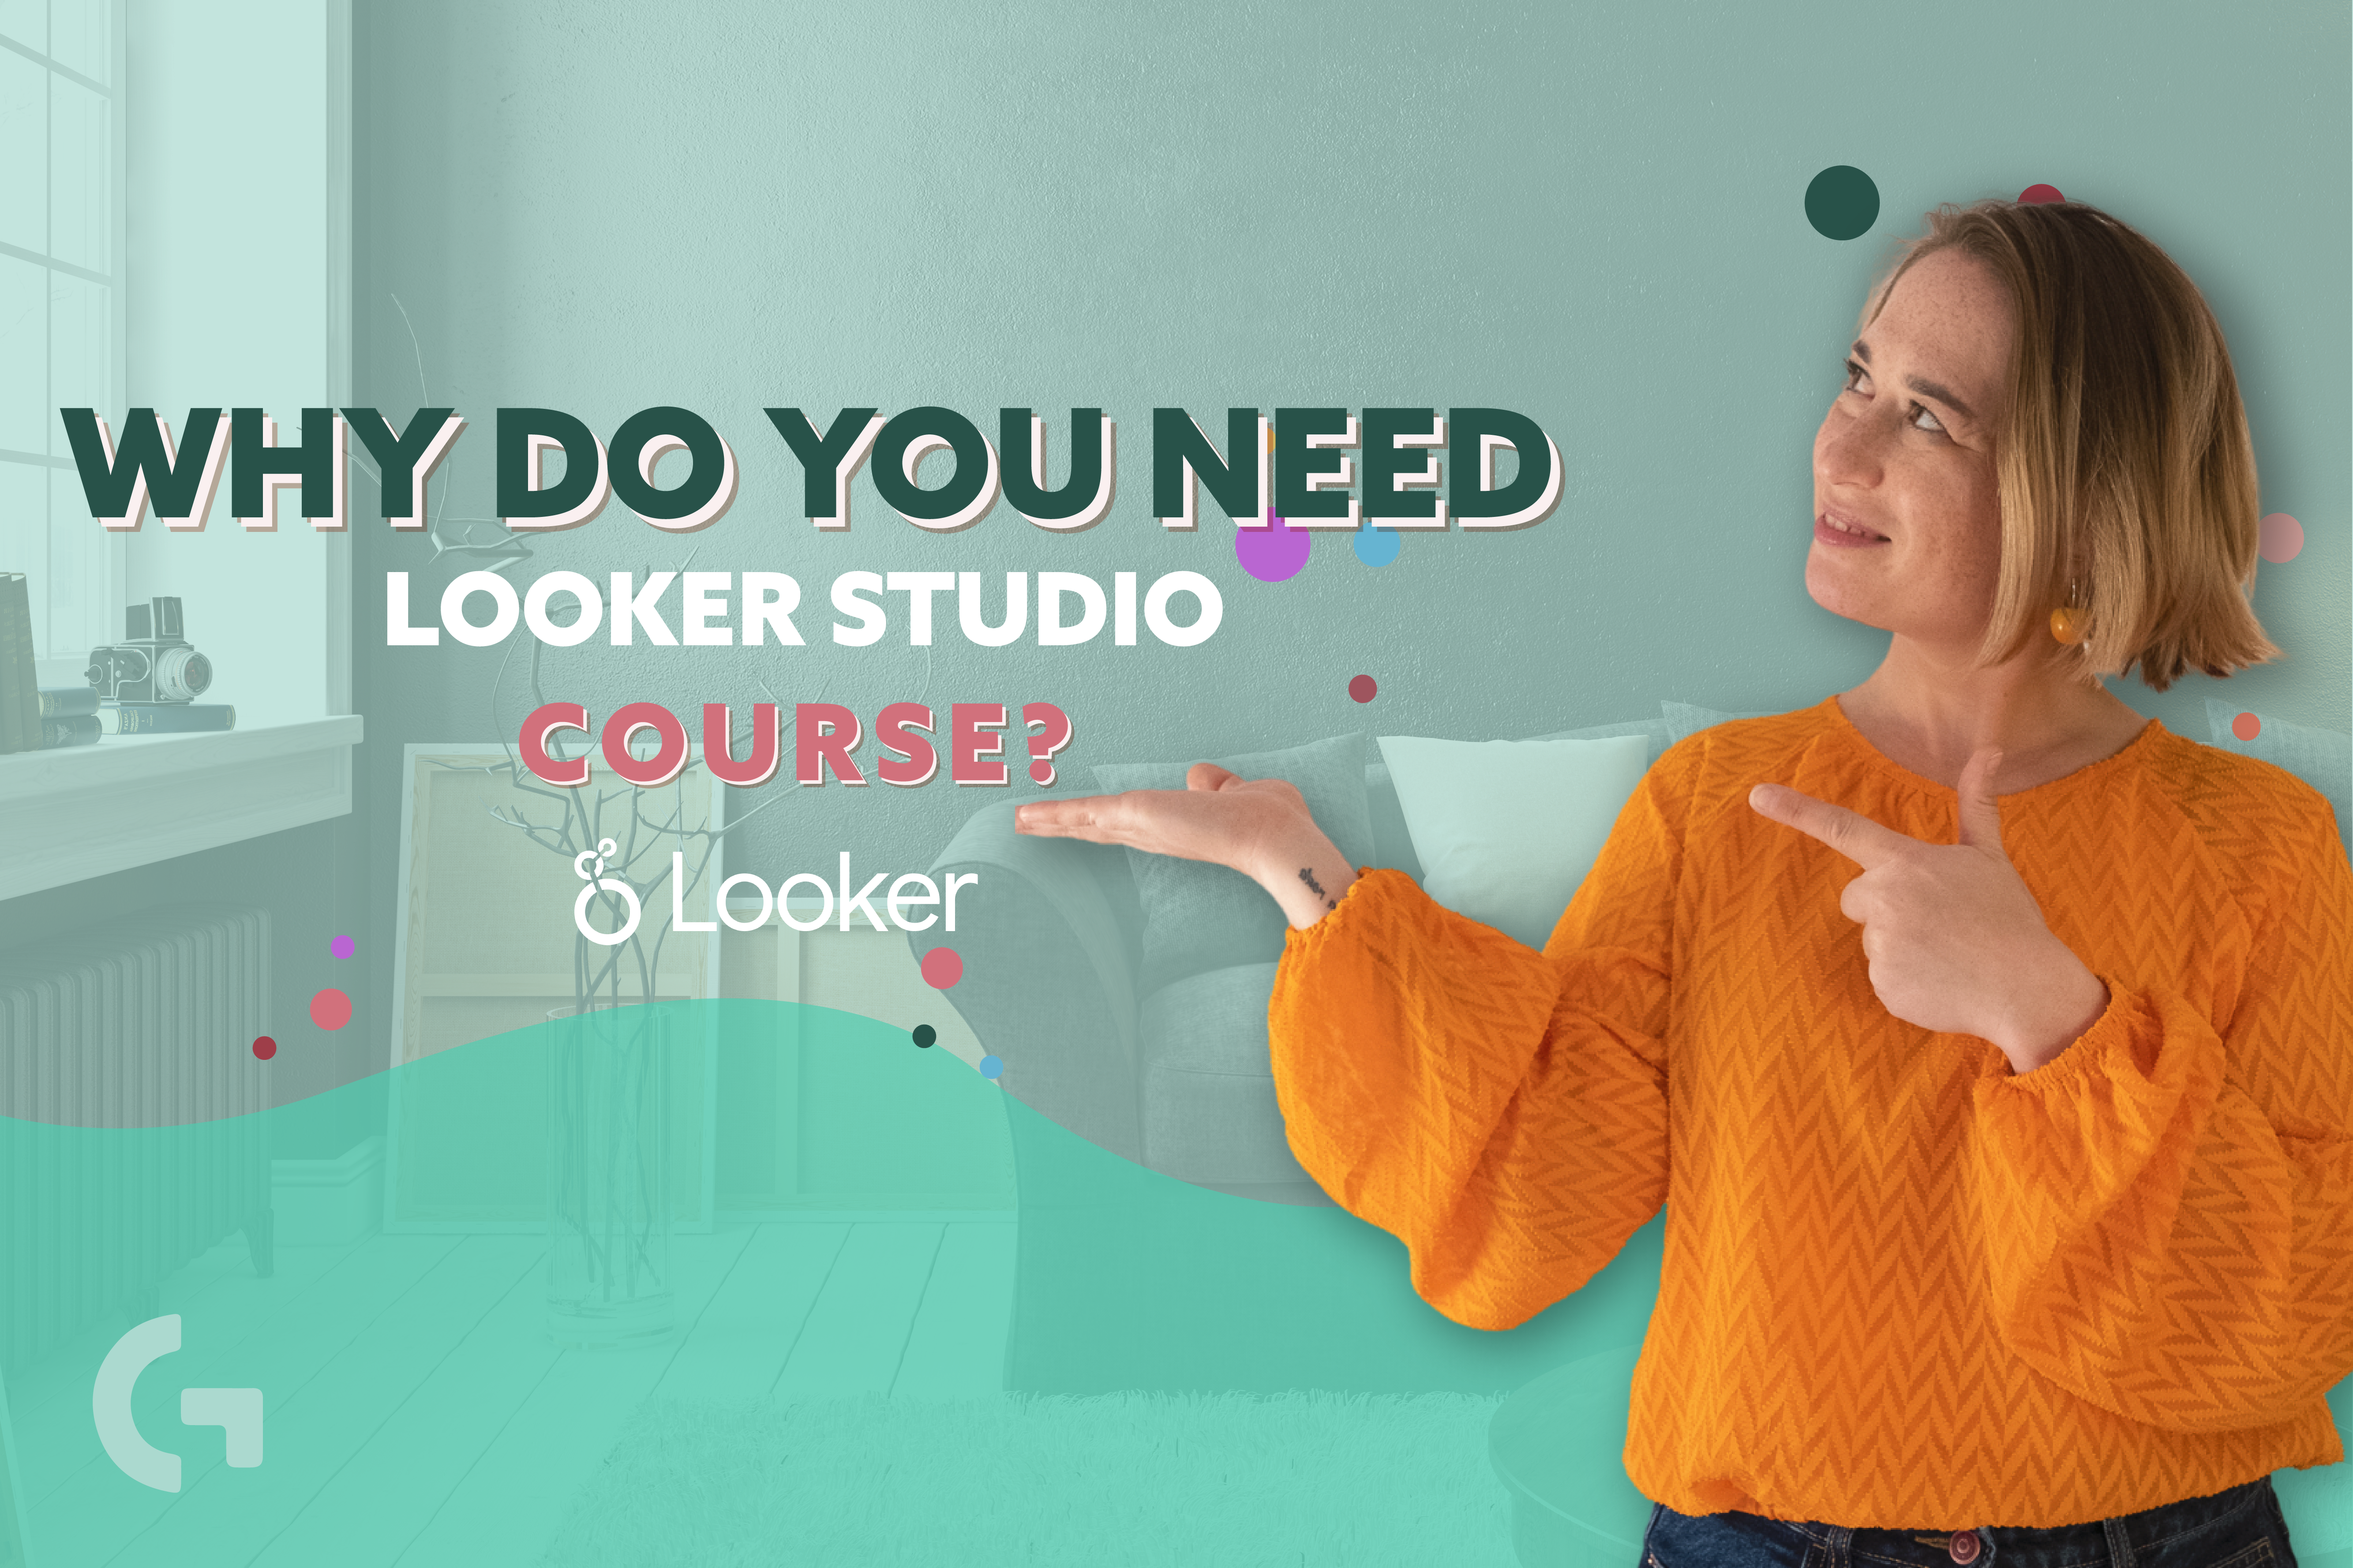 Why do you need the Gaille Reports Looker Studio (Google Data Studio) course?